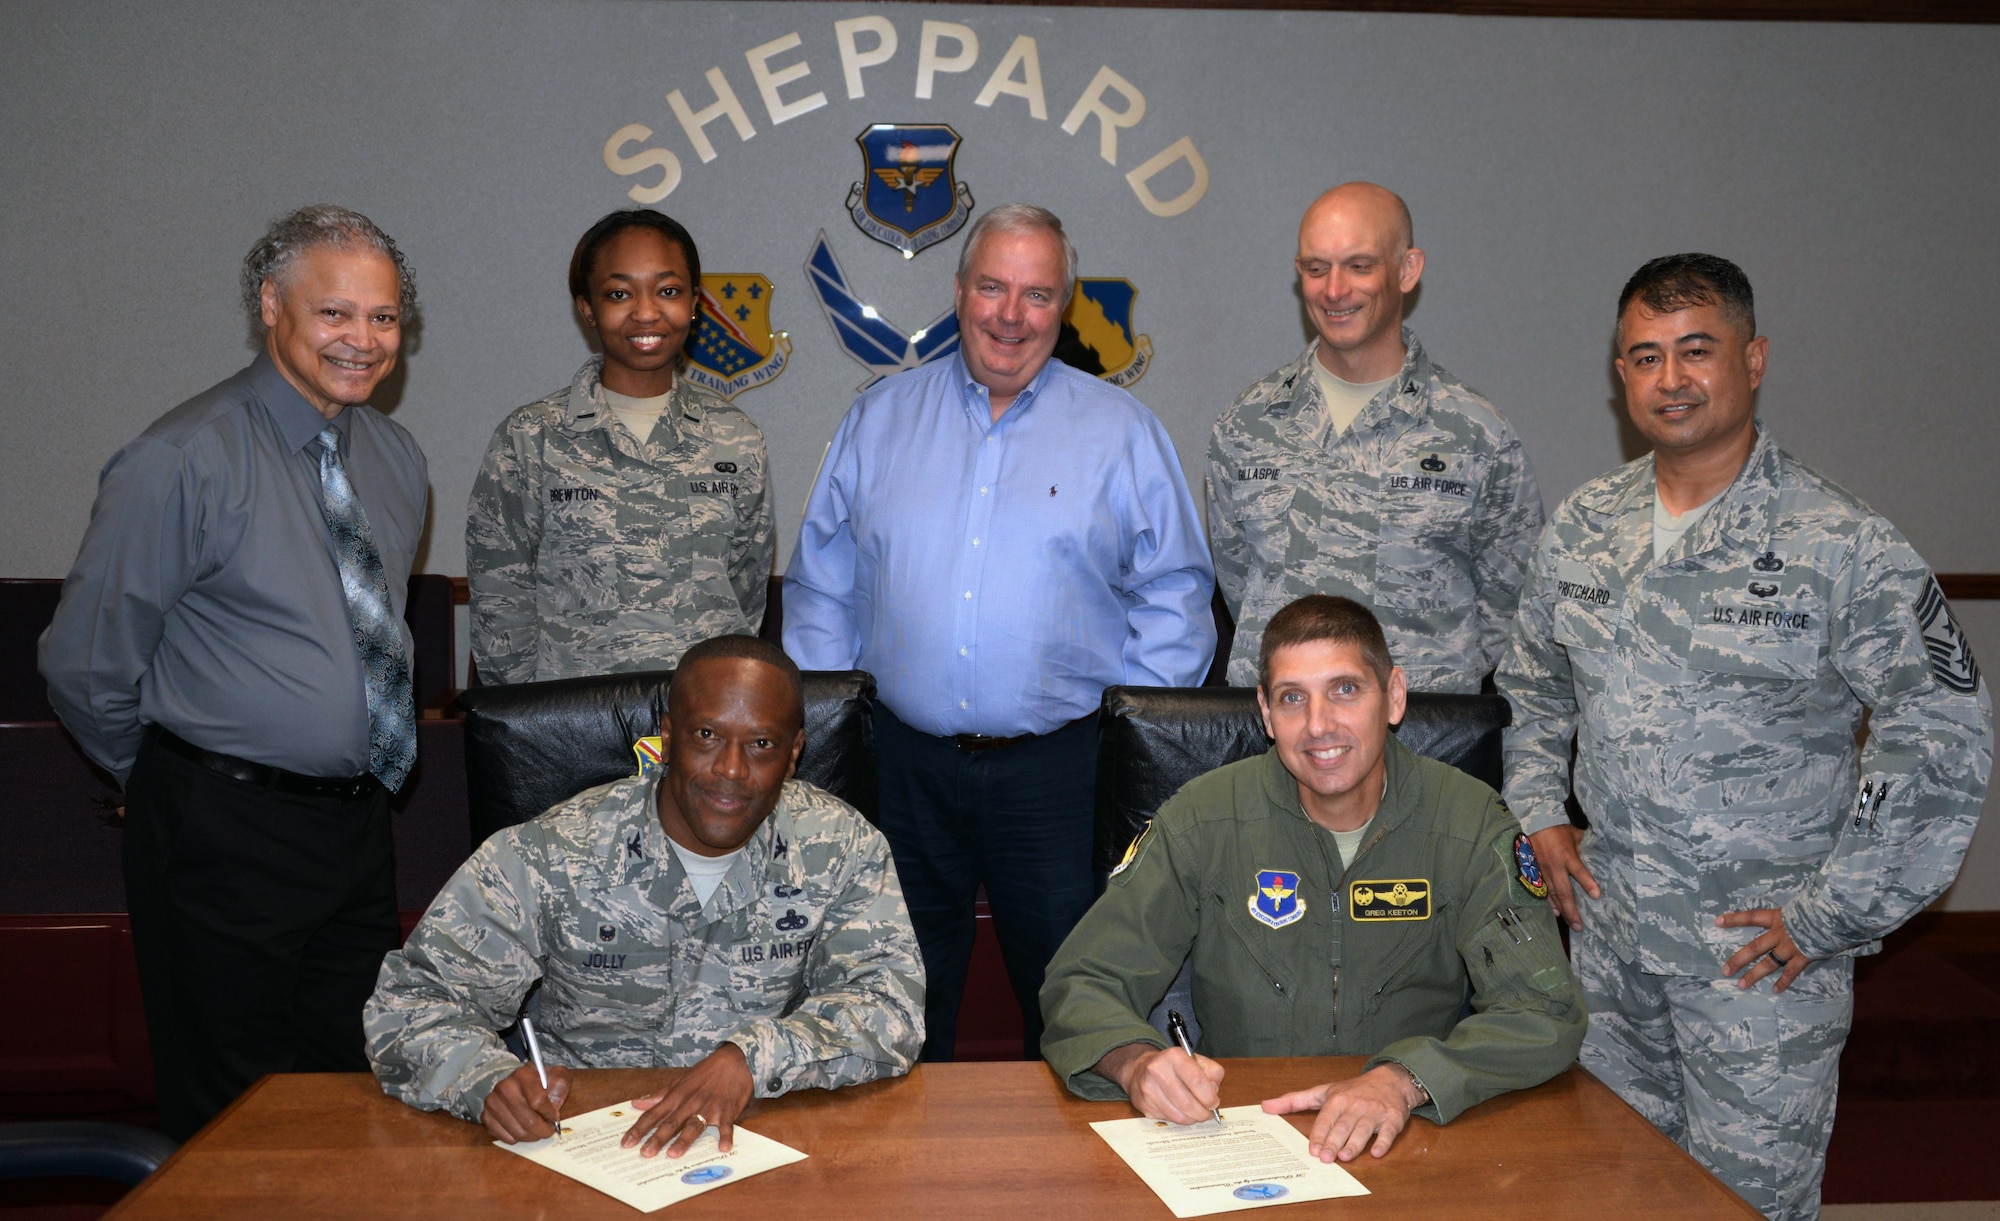 Col. Ronald Jolly, 82nd Training Wing commander and Col. Gregory Keeton, 80th Flying Training Wing commander, support Sexual Assault Awareness and Prevention Month by signing a proclamation March 30, 2017. April is recognized as Sexual Assault Awareness and Prevention Month across the country by both civilian and military communities. The month is an opportunity to highlight robust efforts to care for victims and innovative ways we are working to infuse prevention practices into our daily mission. (U.S. Air Force photo by Senior Airman Robert L. McIlrath/Released)